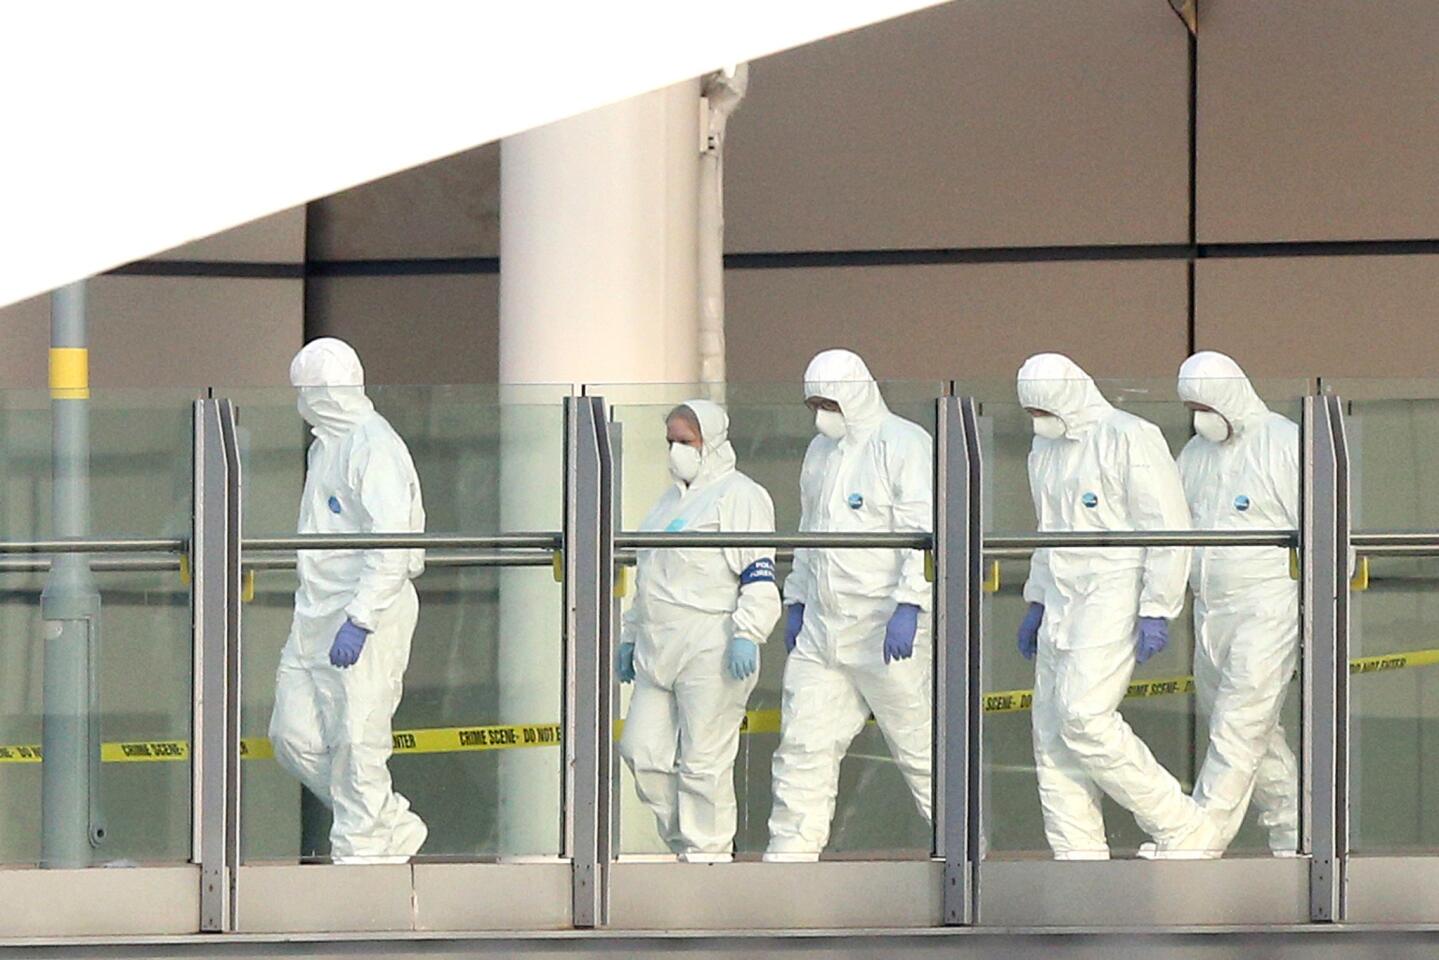 Forensic officers work the scene at Manchester Arena on Tuesday.